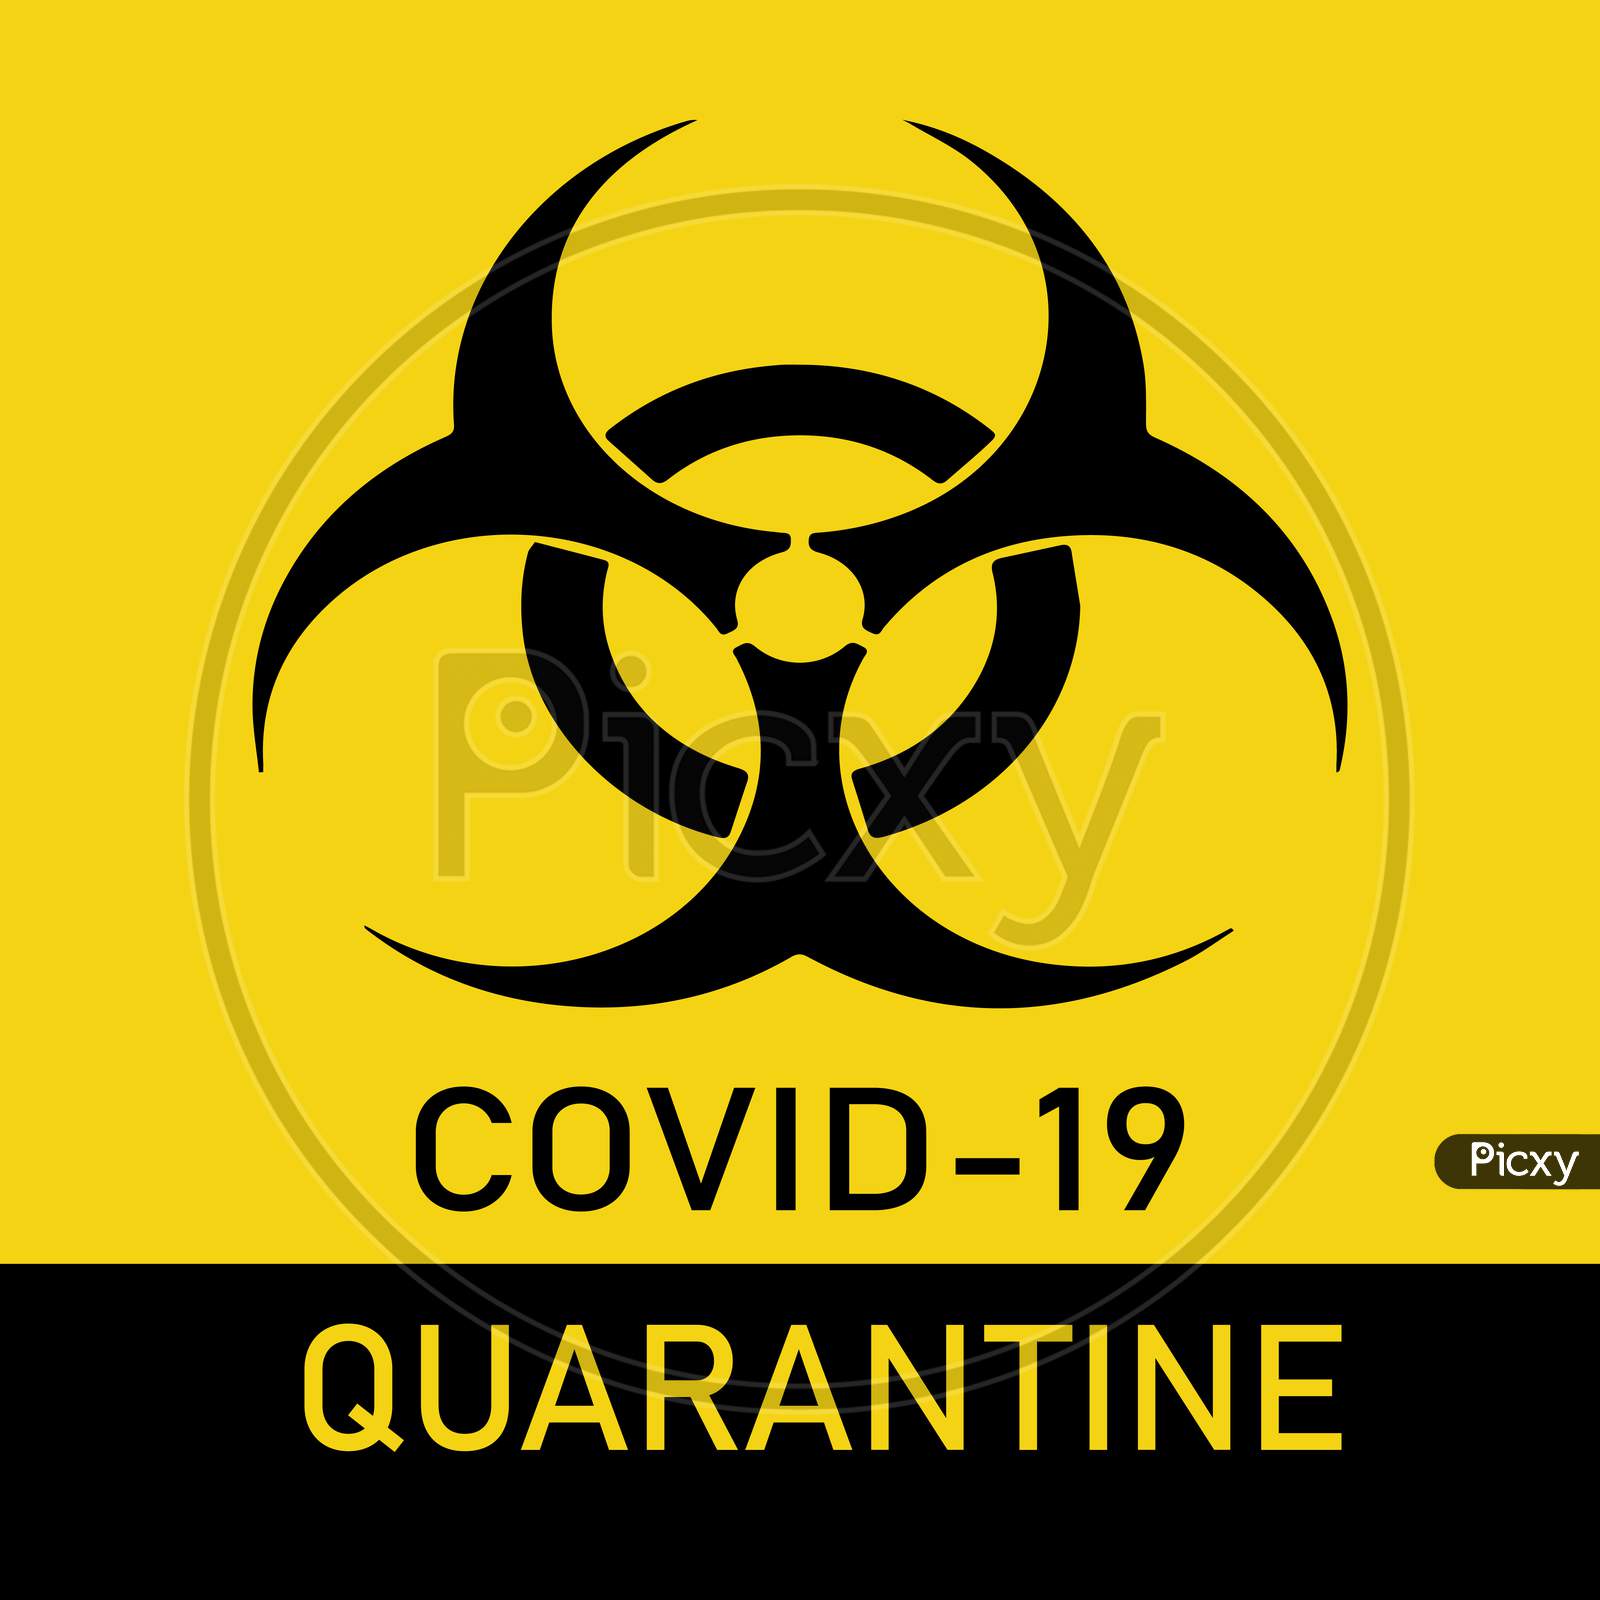 Covid-19 Biohazard Warning Quarantine Poster. Vector Template For Posters, Banners, Advertising. Stop Covid-19. Danger Of Infection From Coronavirus Sign. Concept.